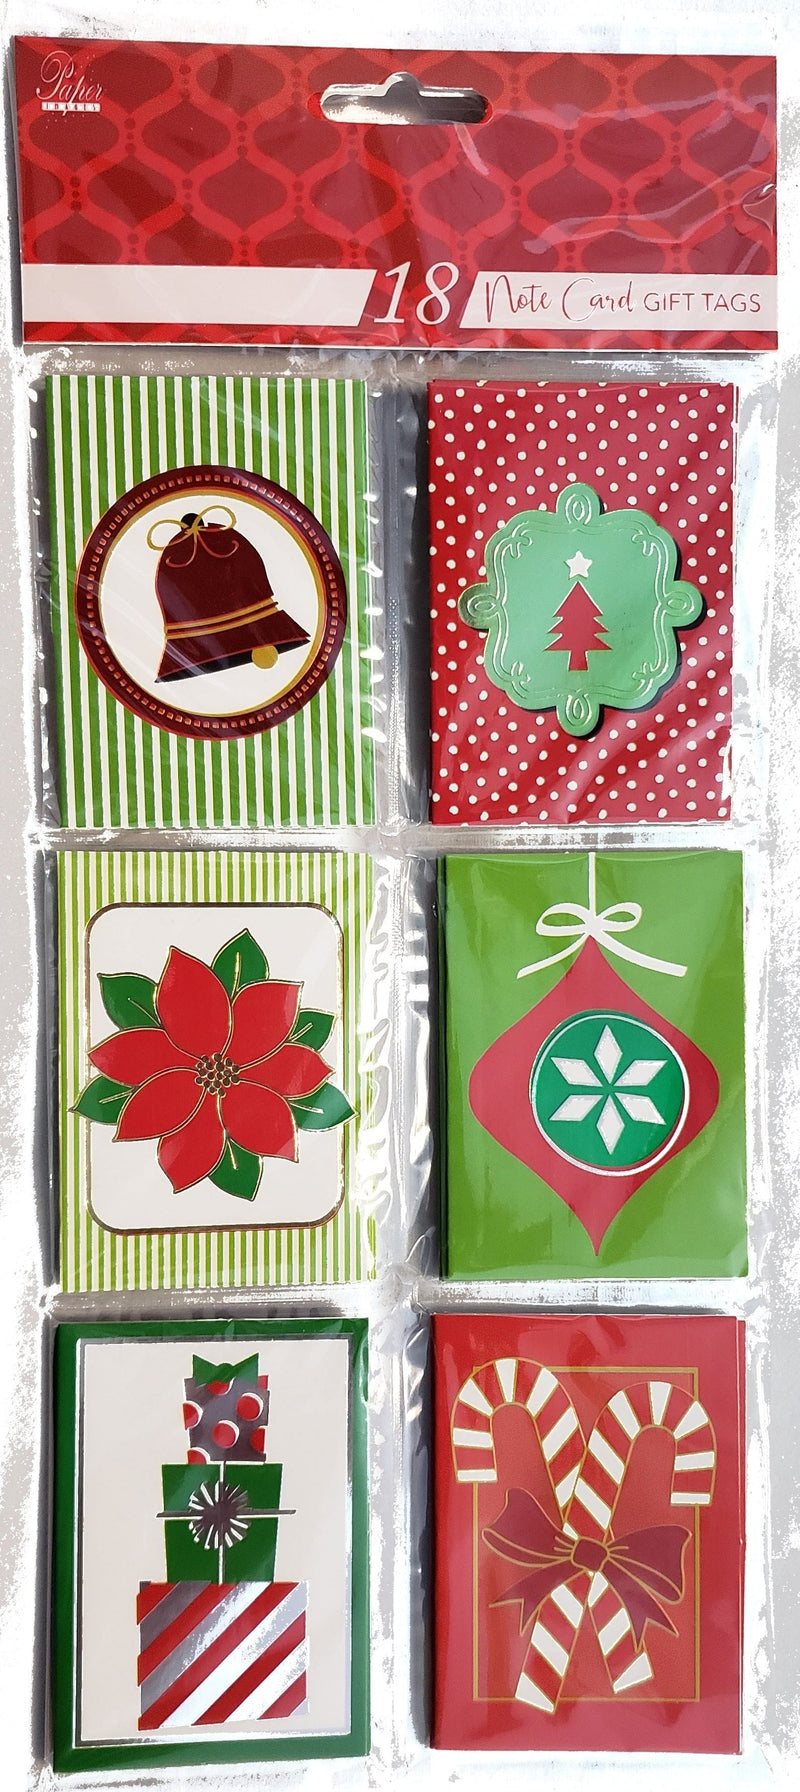 18 Notecard Gift Tag Assortment - Icons - Shelburne Country Store